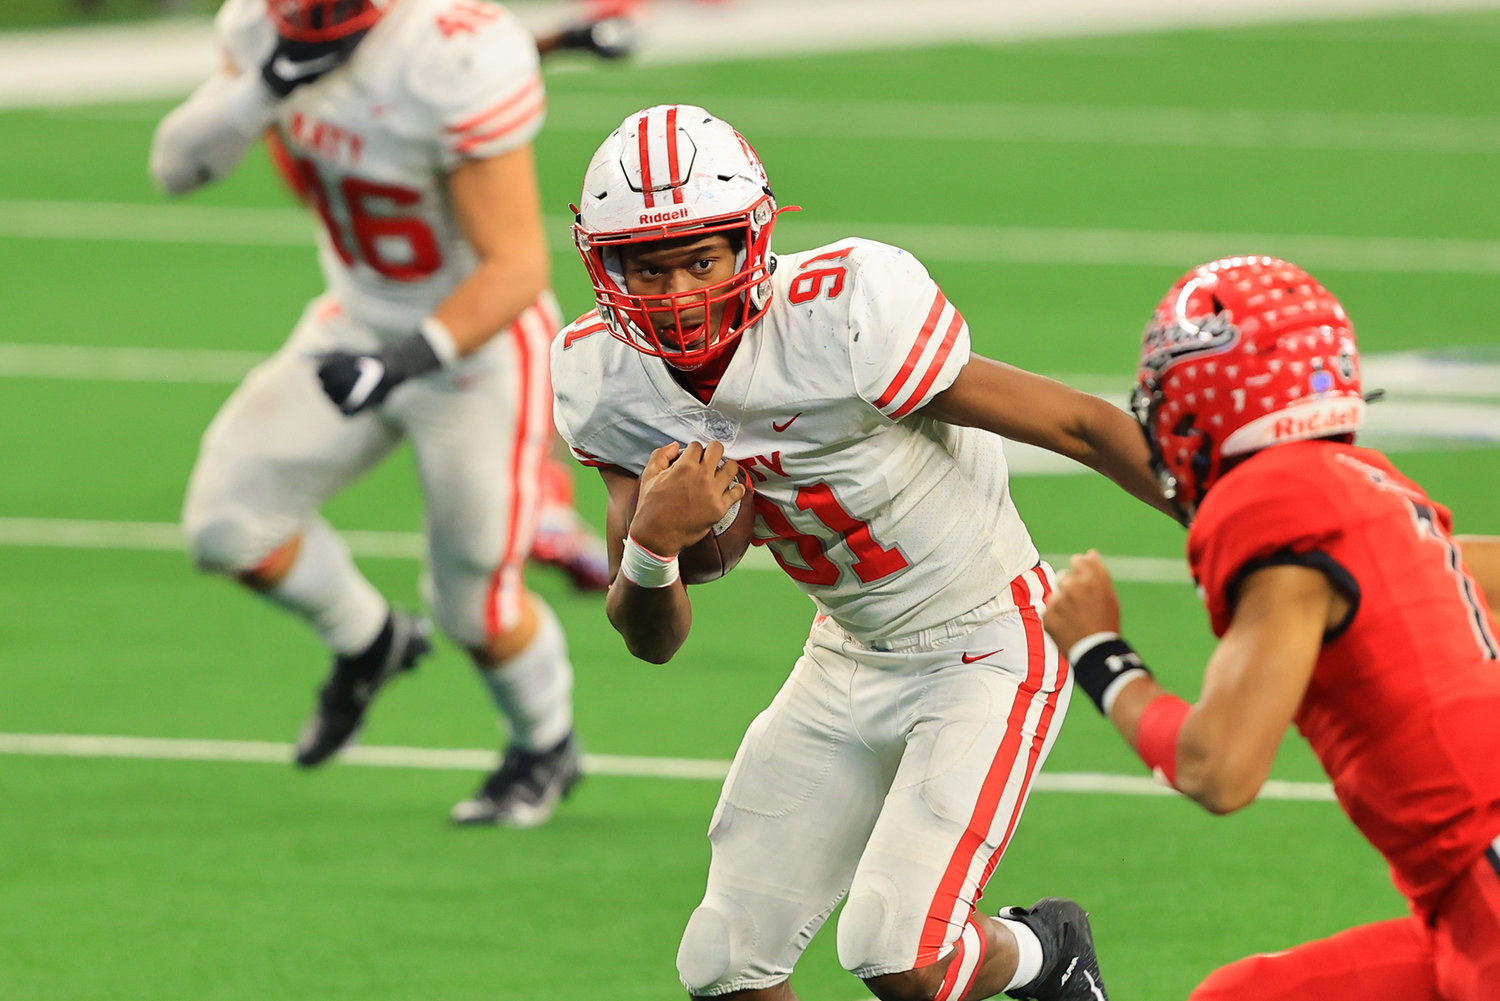 Katy senior defensive end Cal Varner III returns an interception for a touchdown during the fourth quarter of the Tigers' 51-14 win over Cedar Hill at AT&T Stadium on Saturday afternoon. Katy won the Class 6A-Division II state championship.